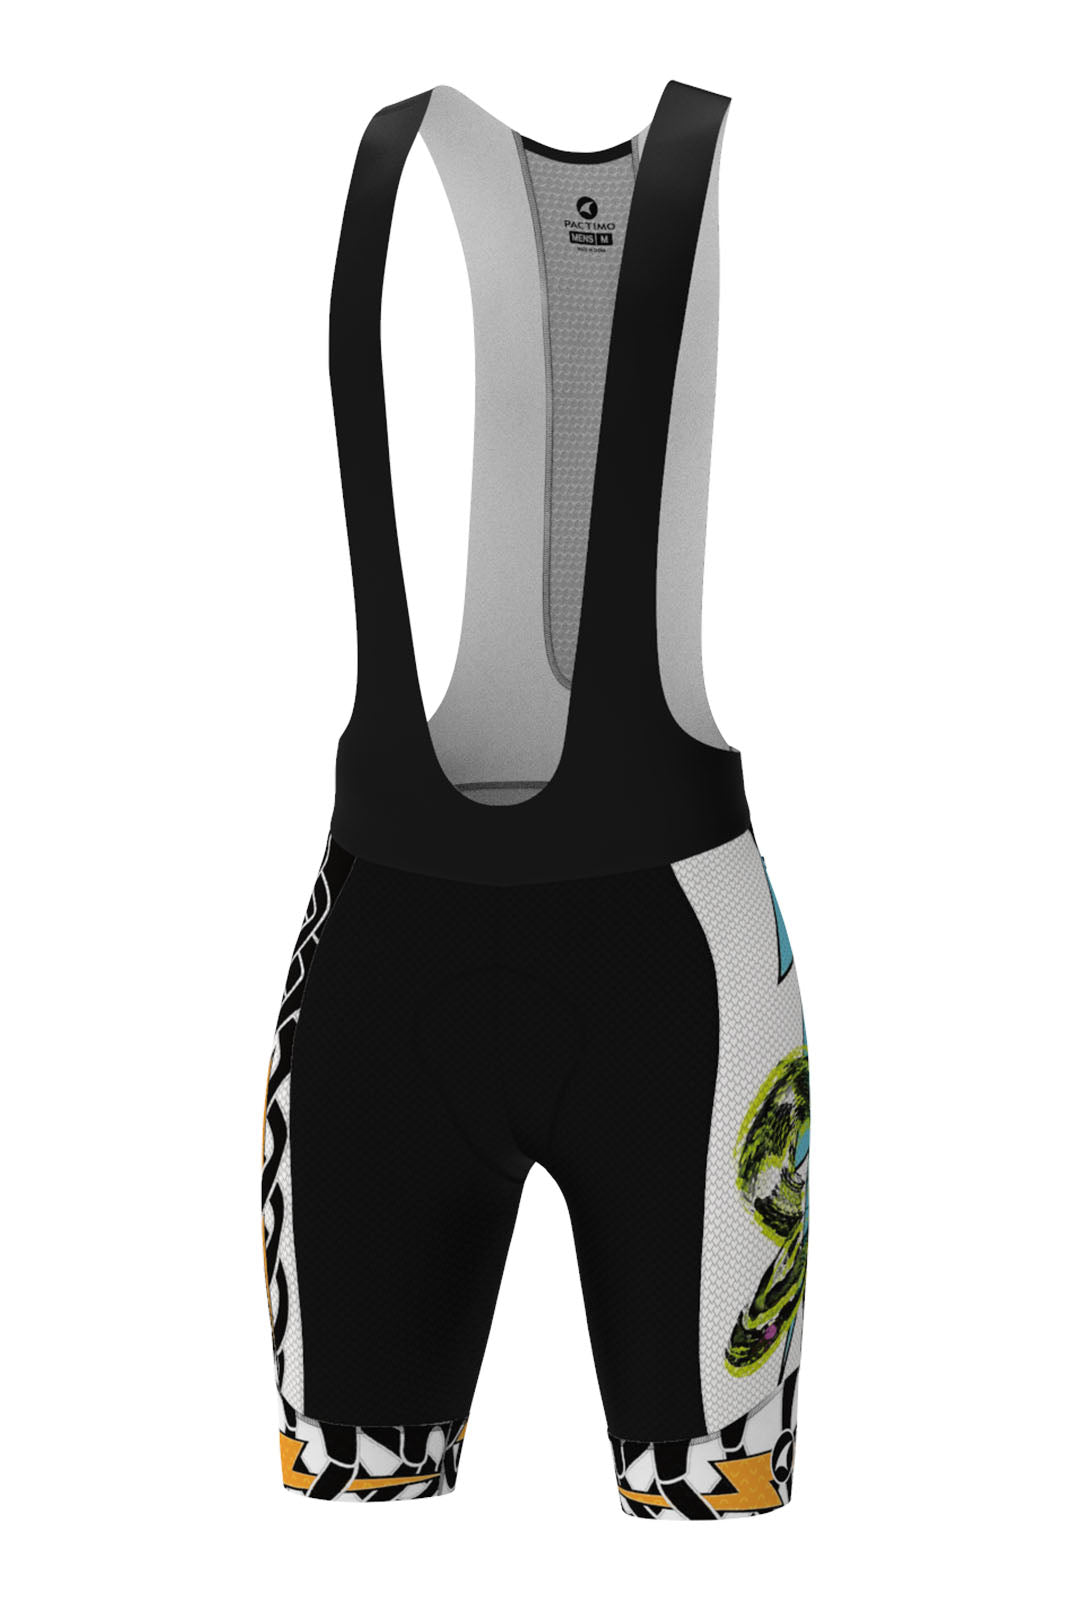 Men's Unique Cycling Bibs - Best Served Cold White Front View